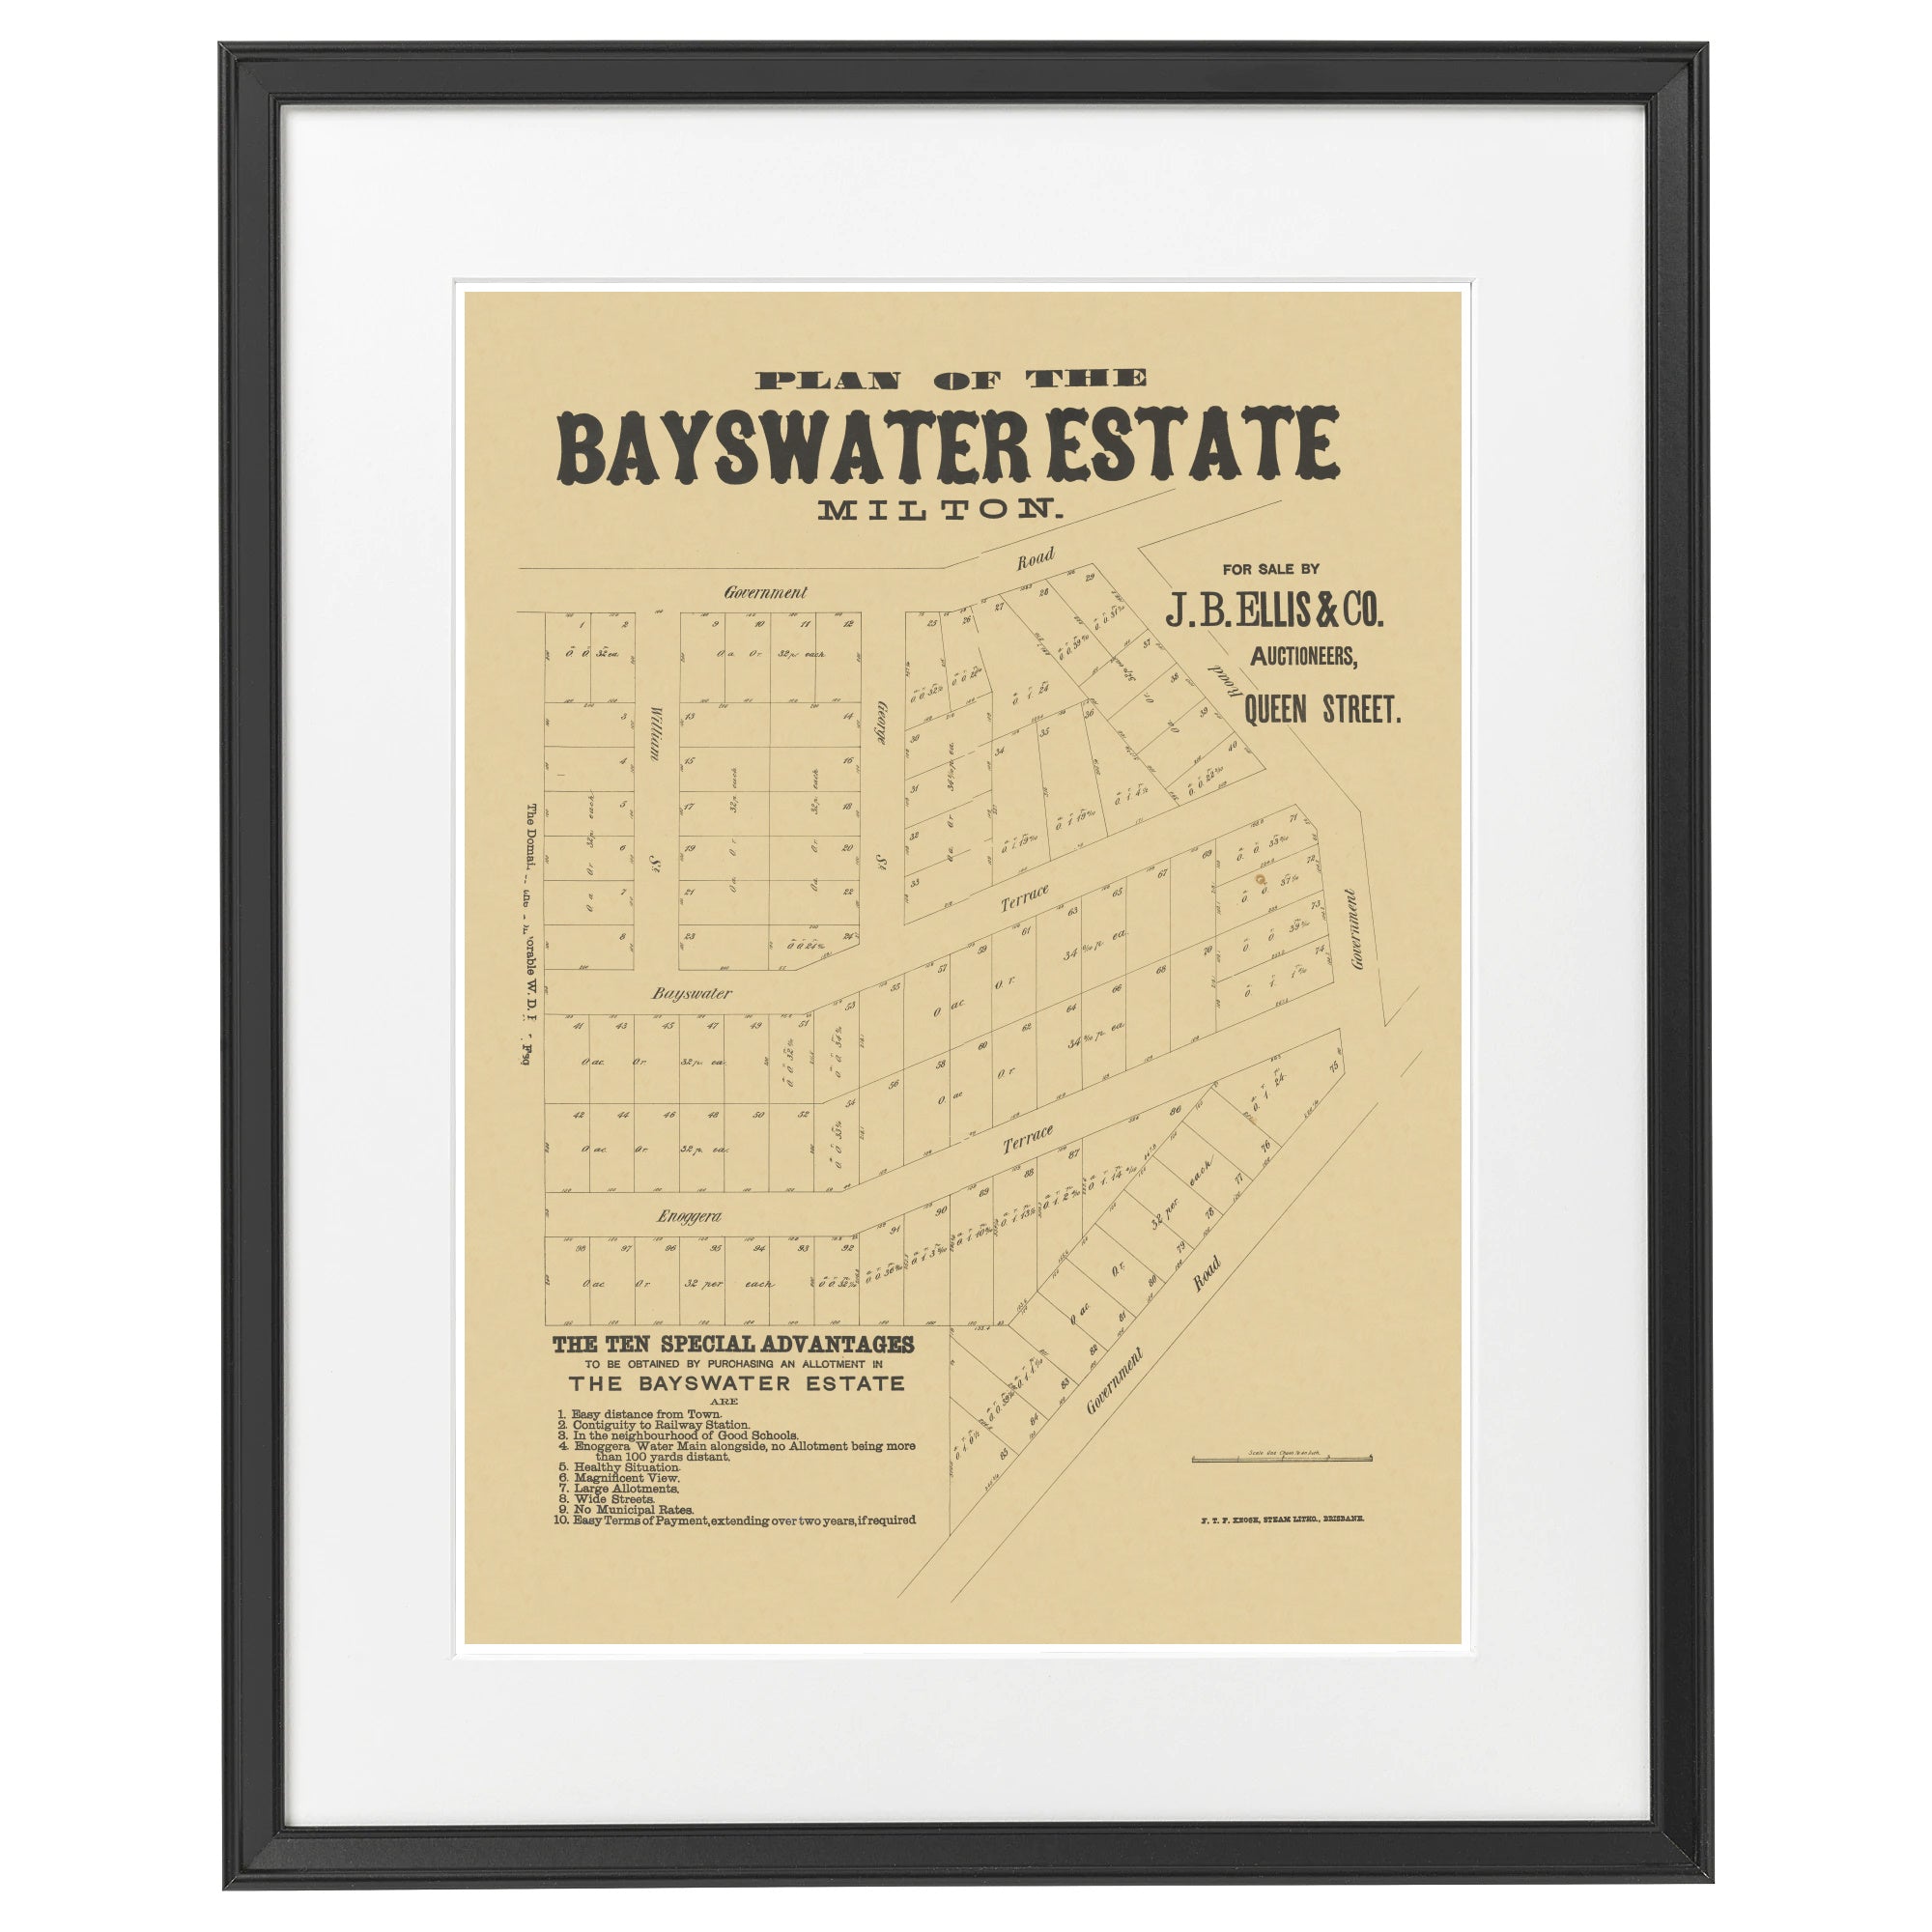 1879 Bayswater Estate - 144 years ago today